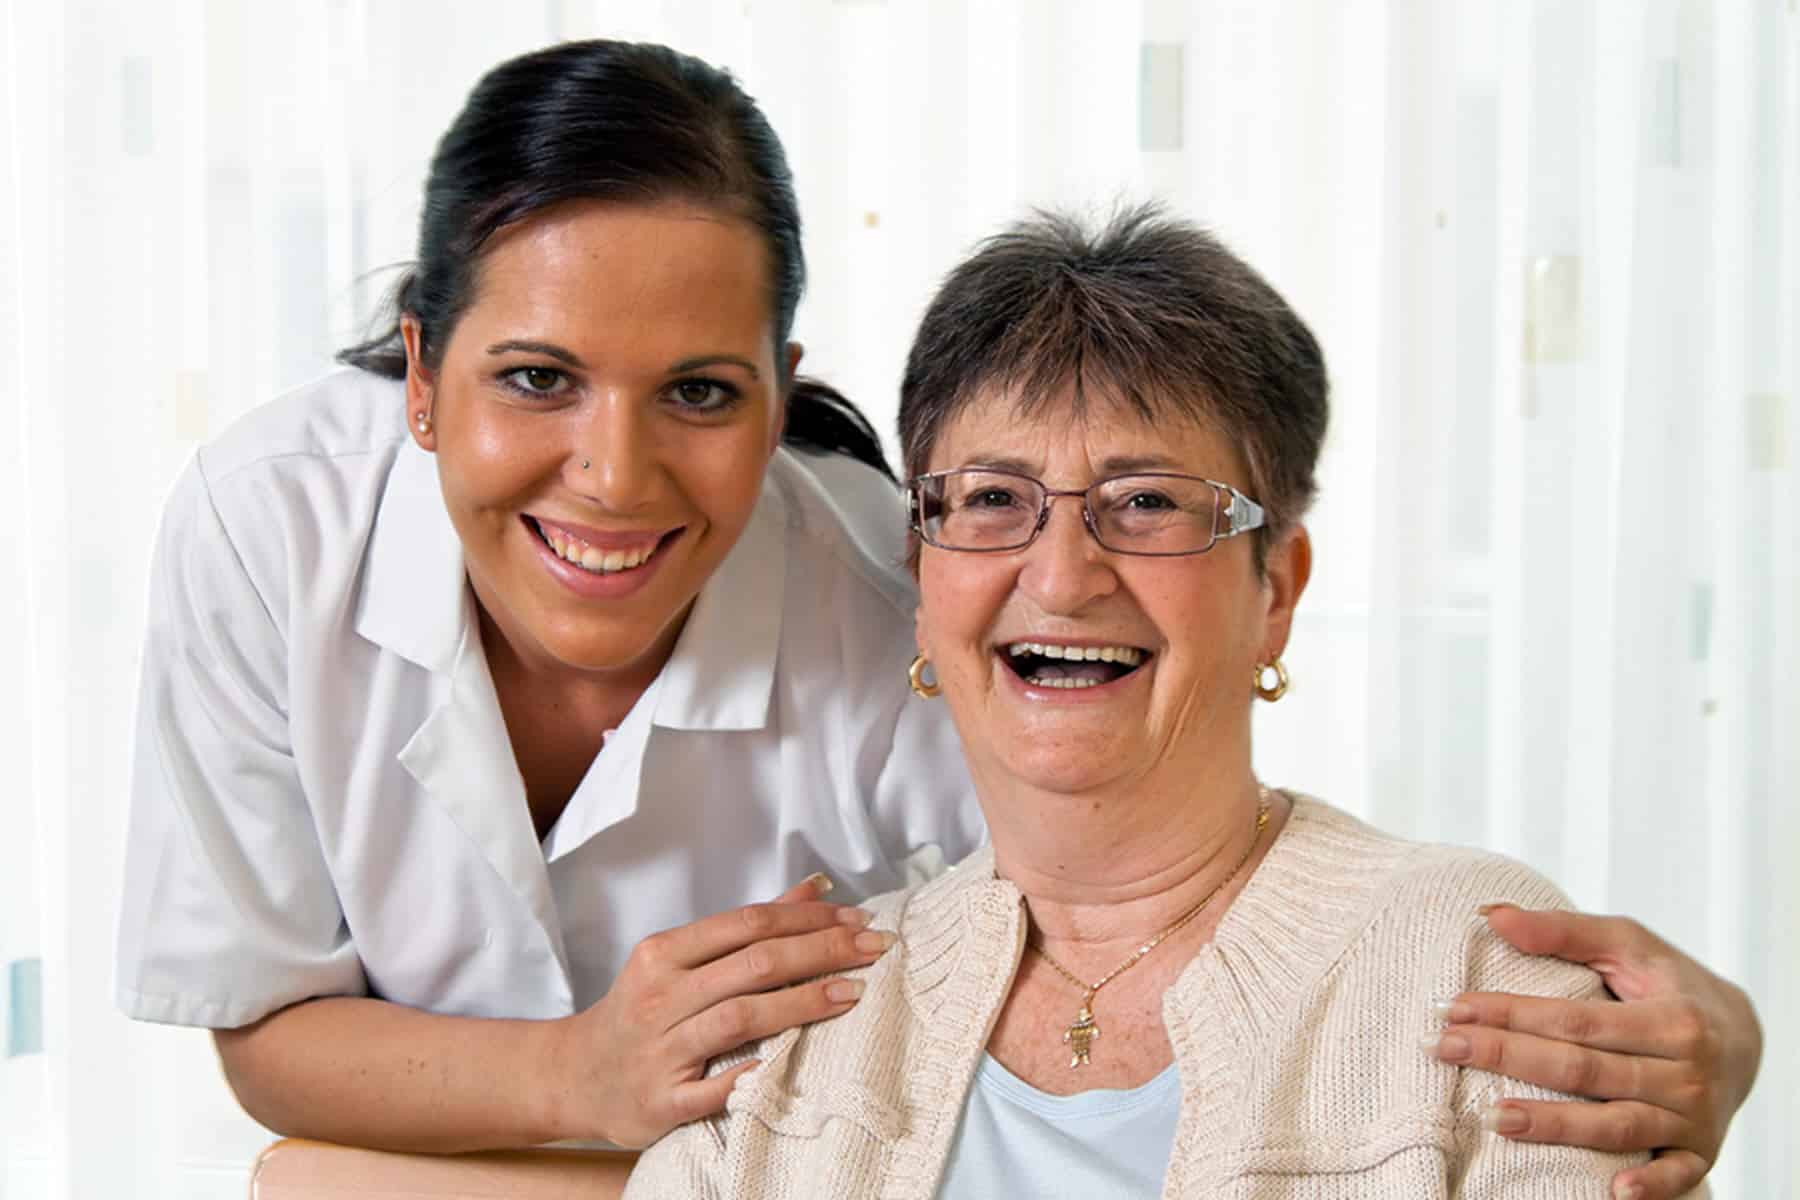 Home Care in Phoenix AZ: Might Senior Care Be a Good Fit?